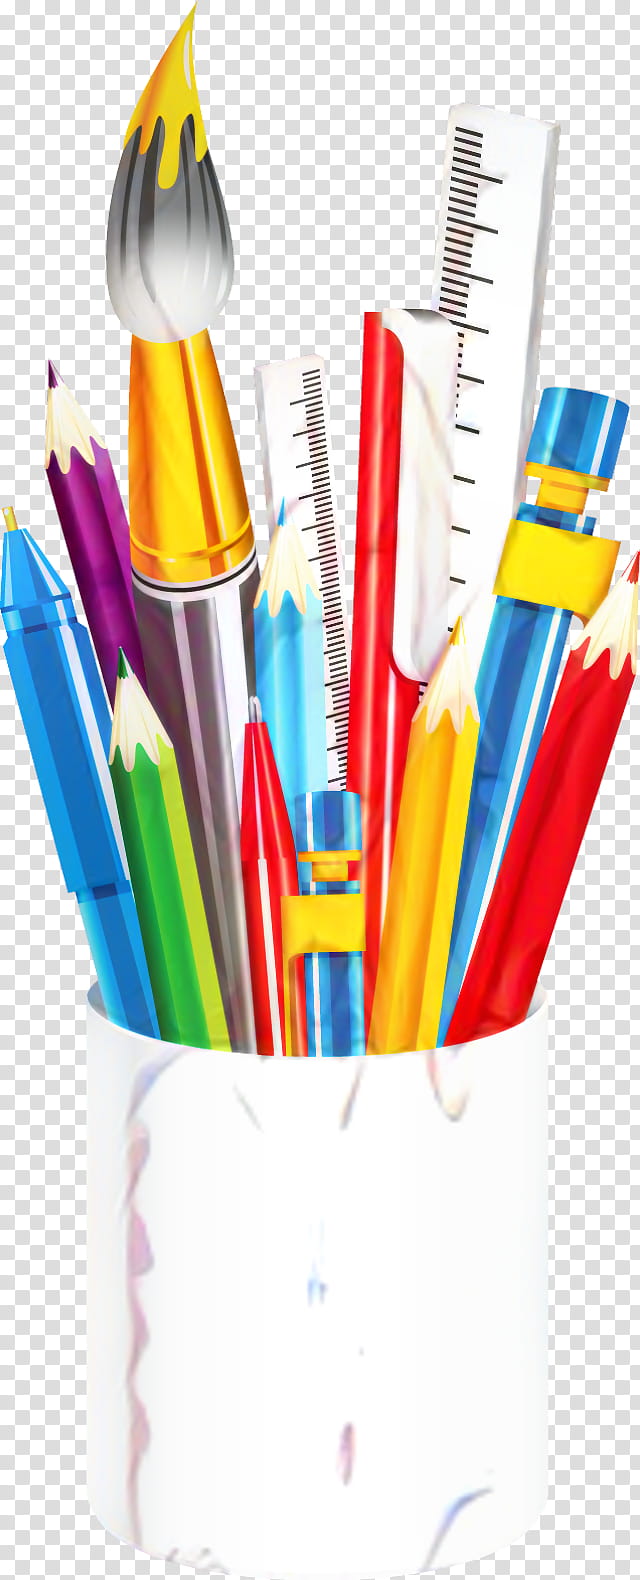 Pencil, Writing Implement, Plastic, Office Supplies, Stationery, Pencil Case, Colorfulness, Office Instrument transparent background PNG clipart